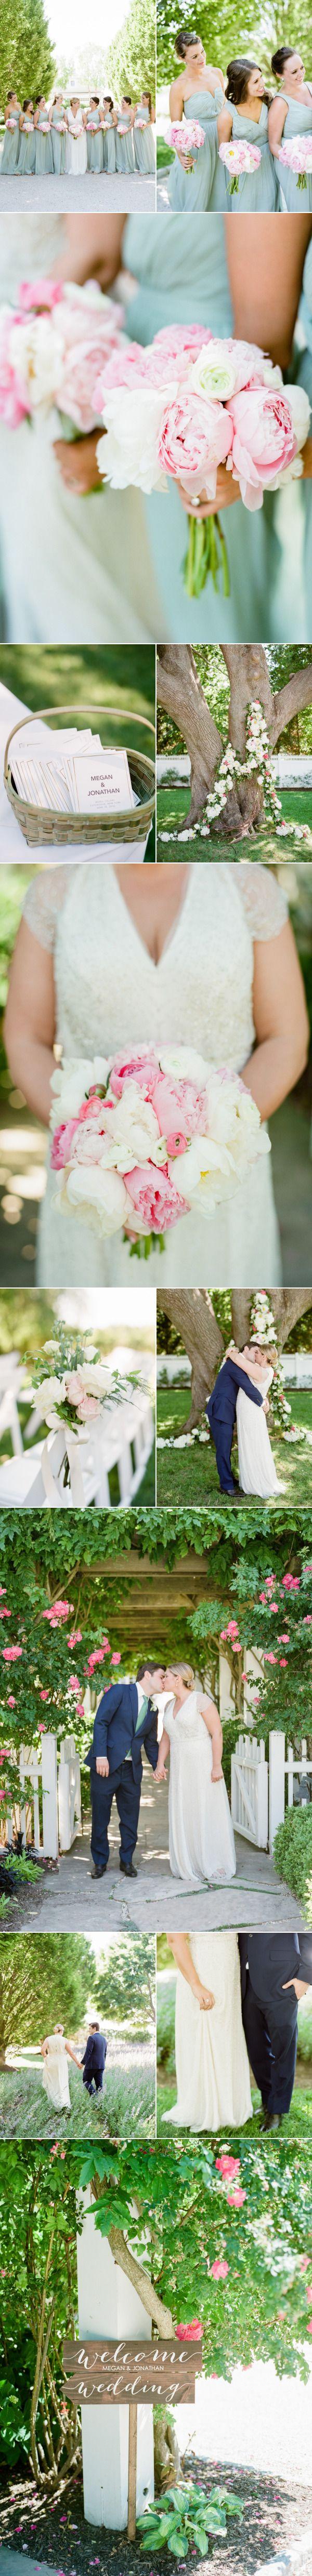 Wedding - A Classic Vineyard Wedding Loaded With Pink Peonies